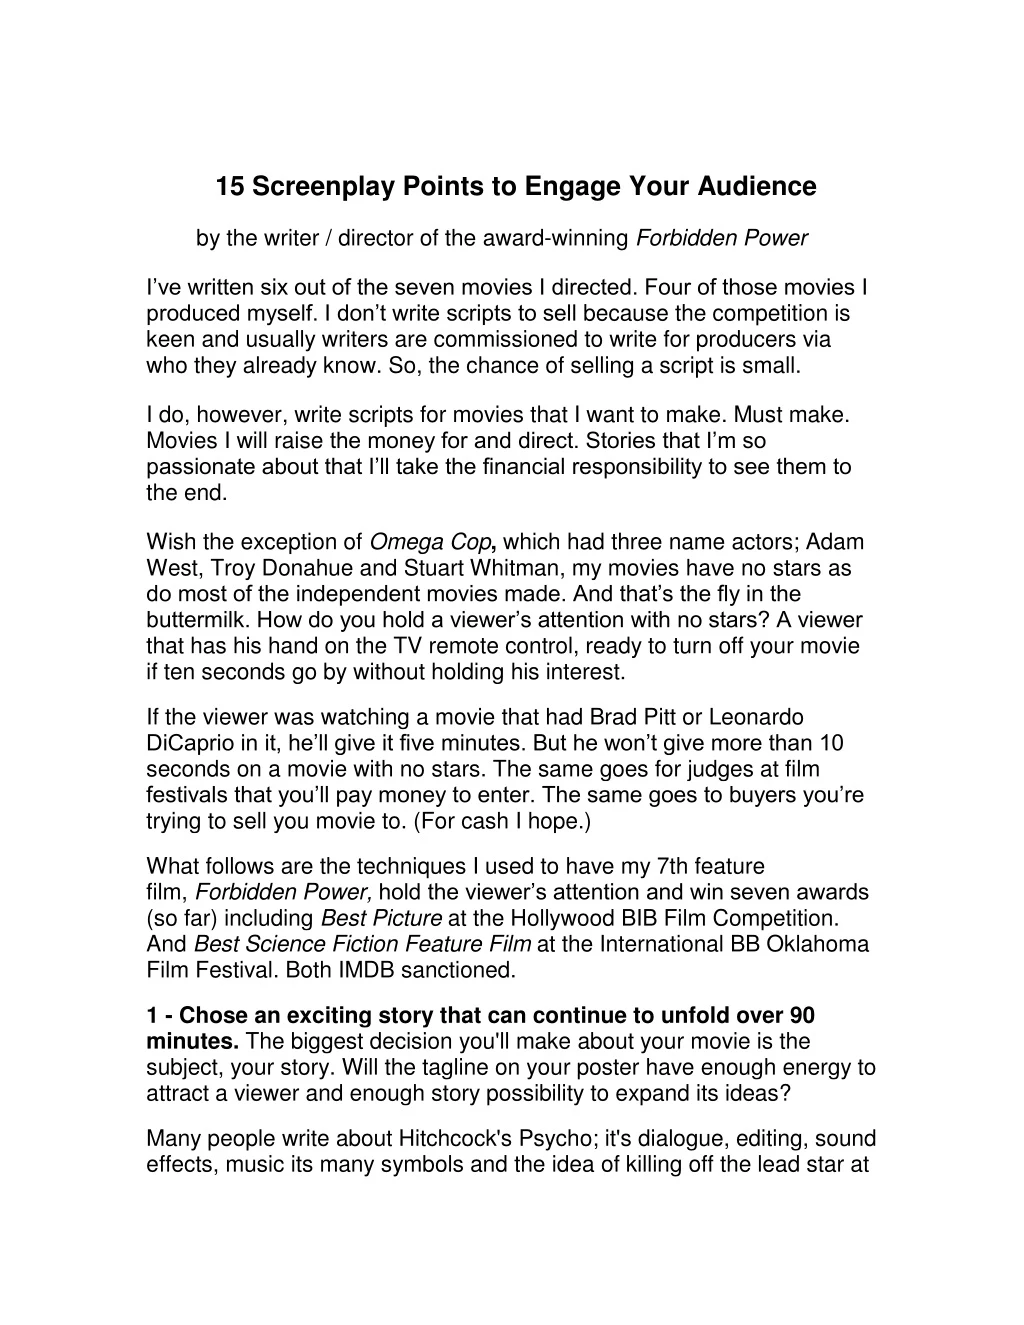 15 screenplay points to engage your audience